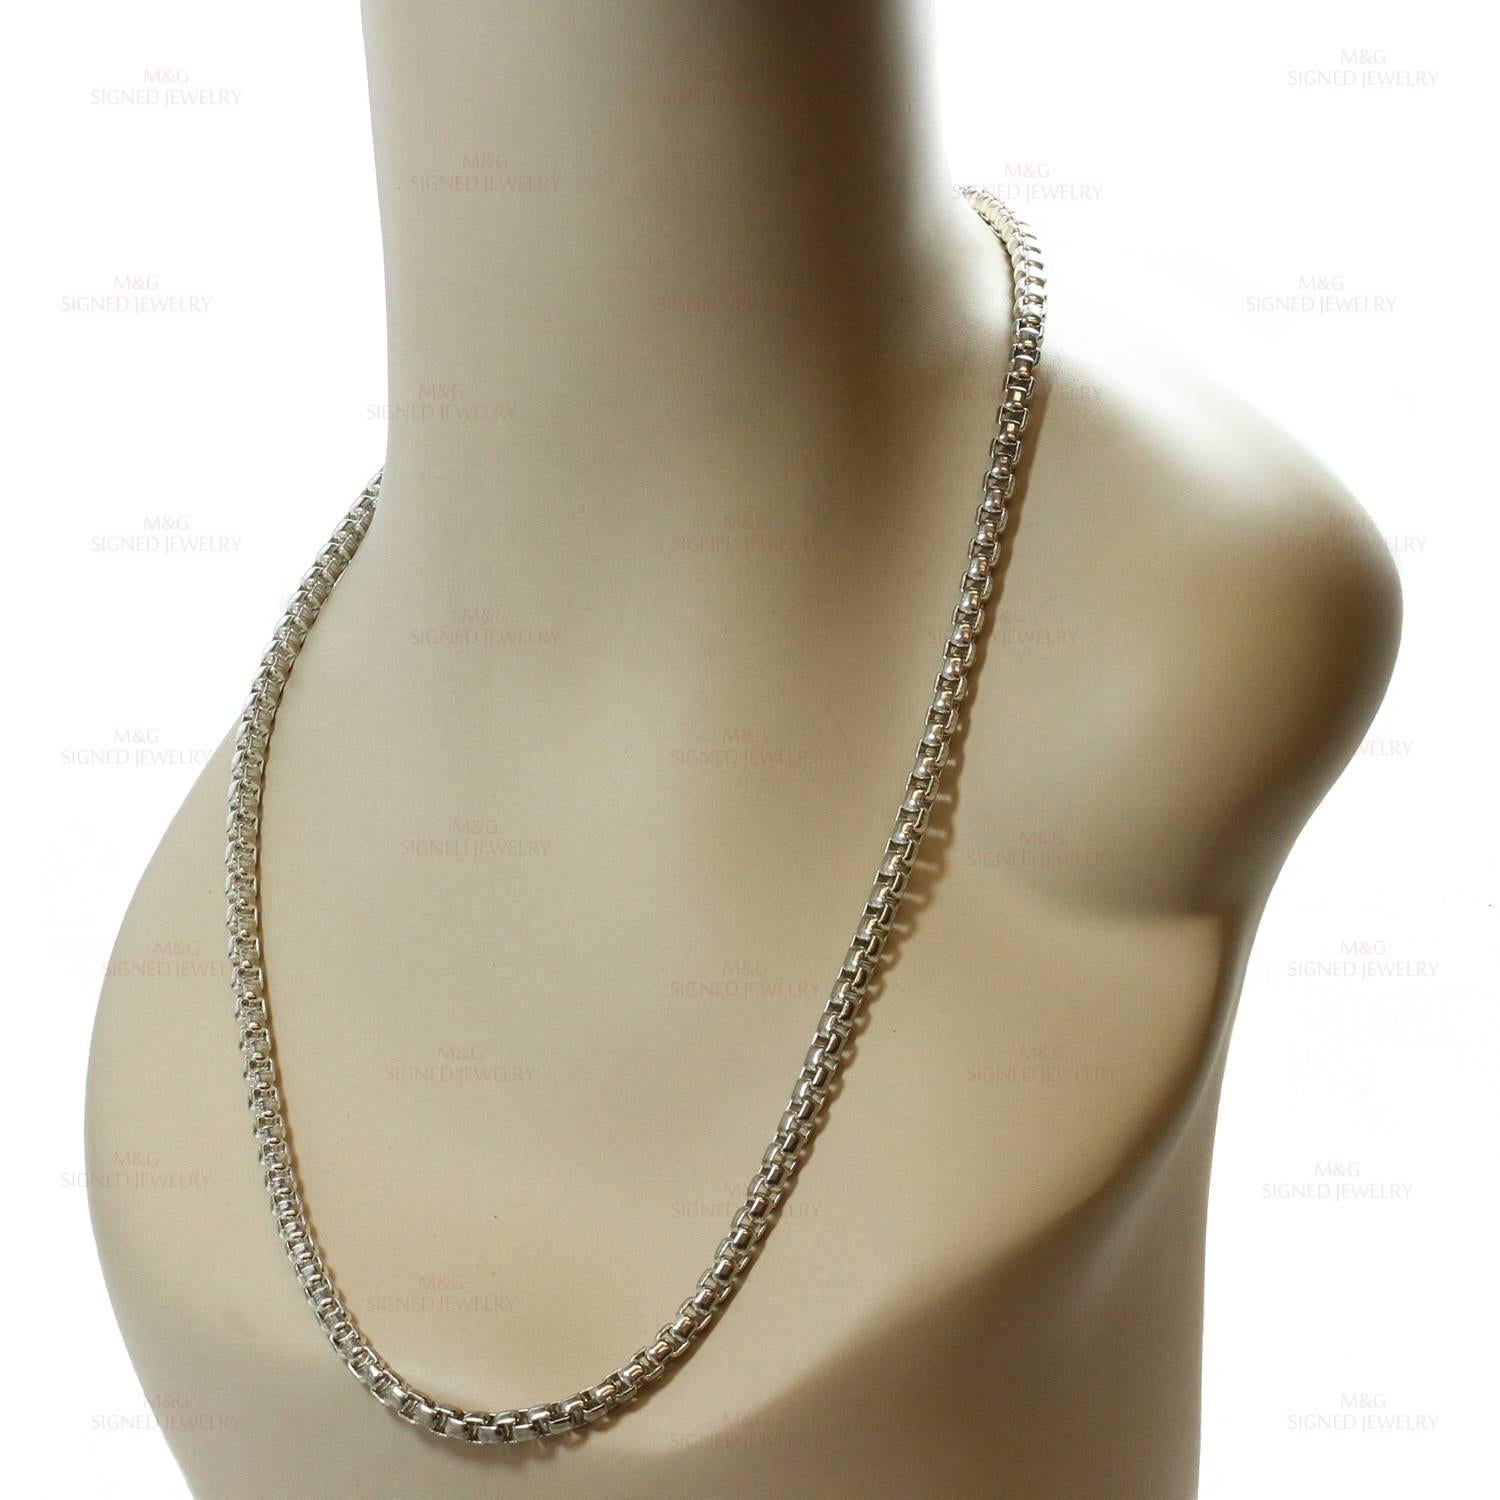 Women's or Men's Sterling Silver Box Chain Necklace